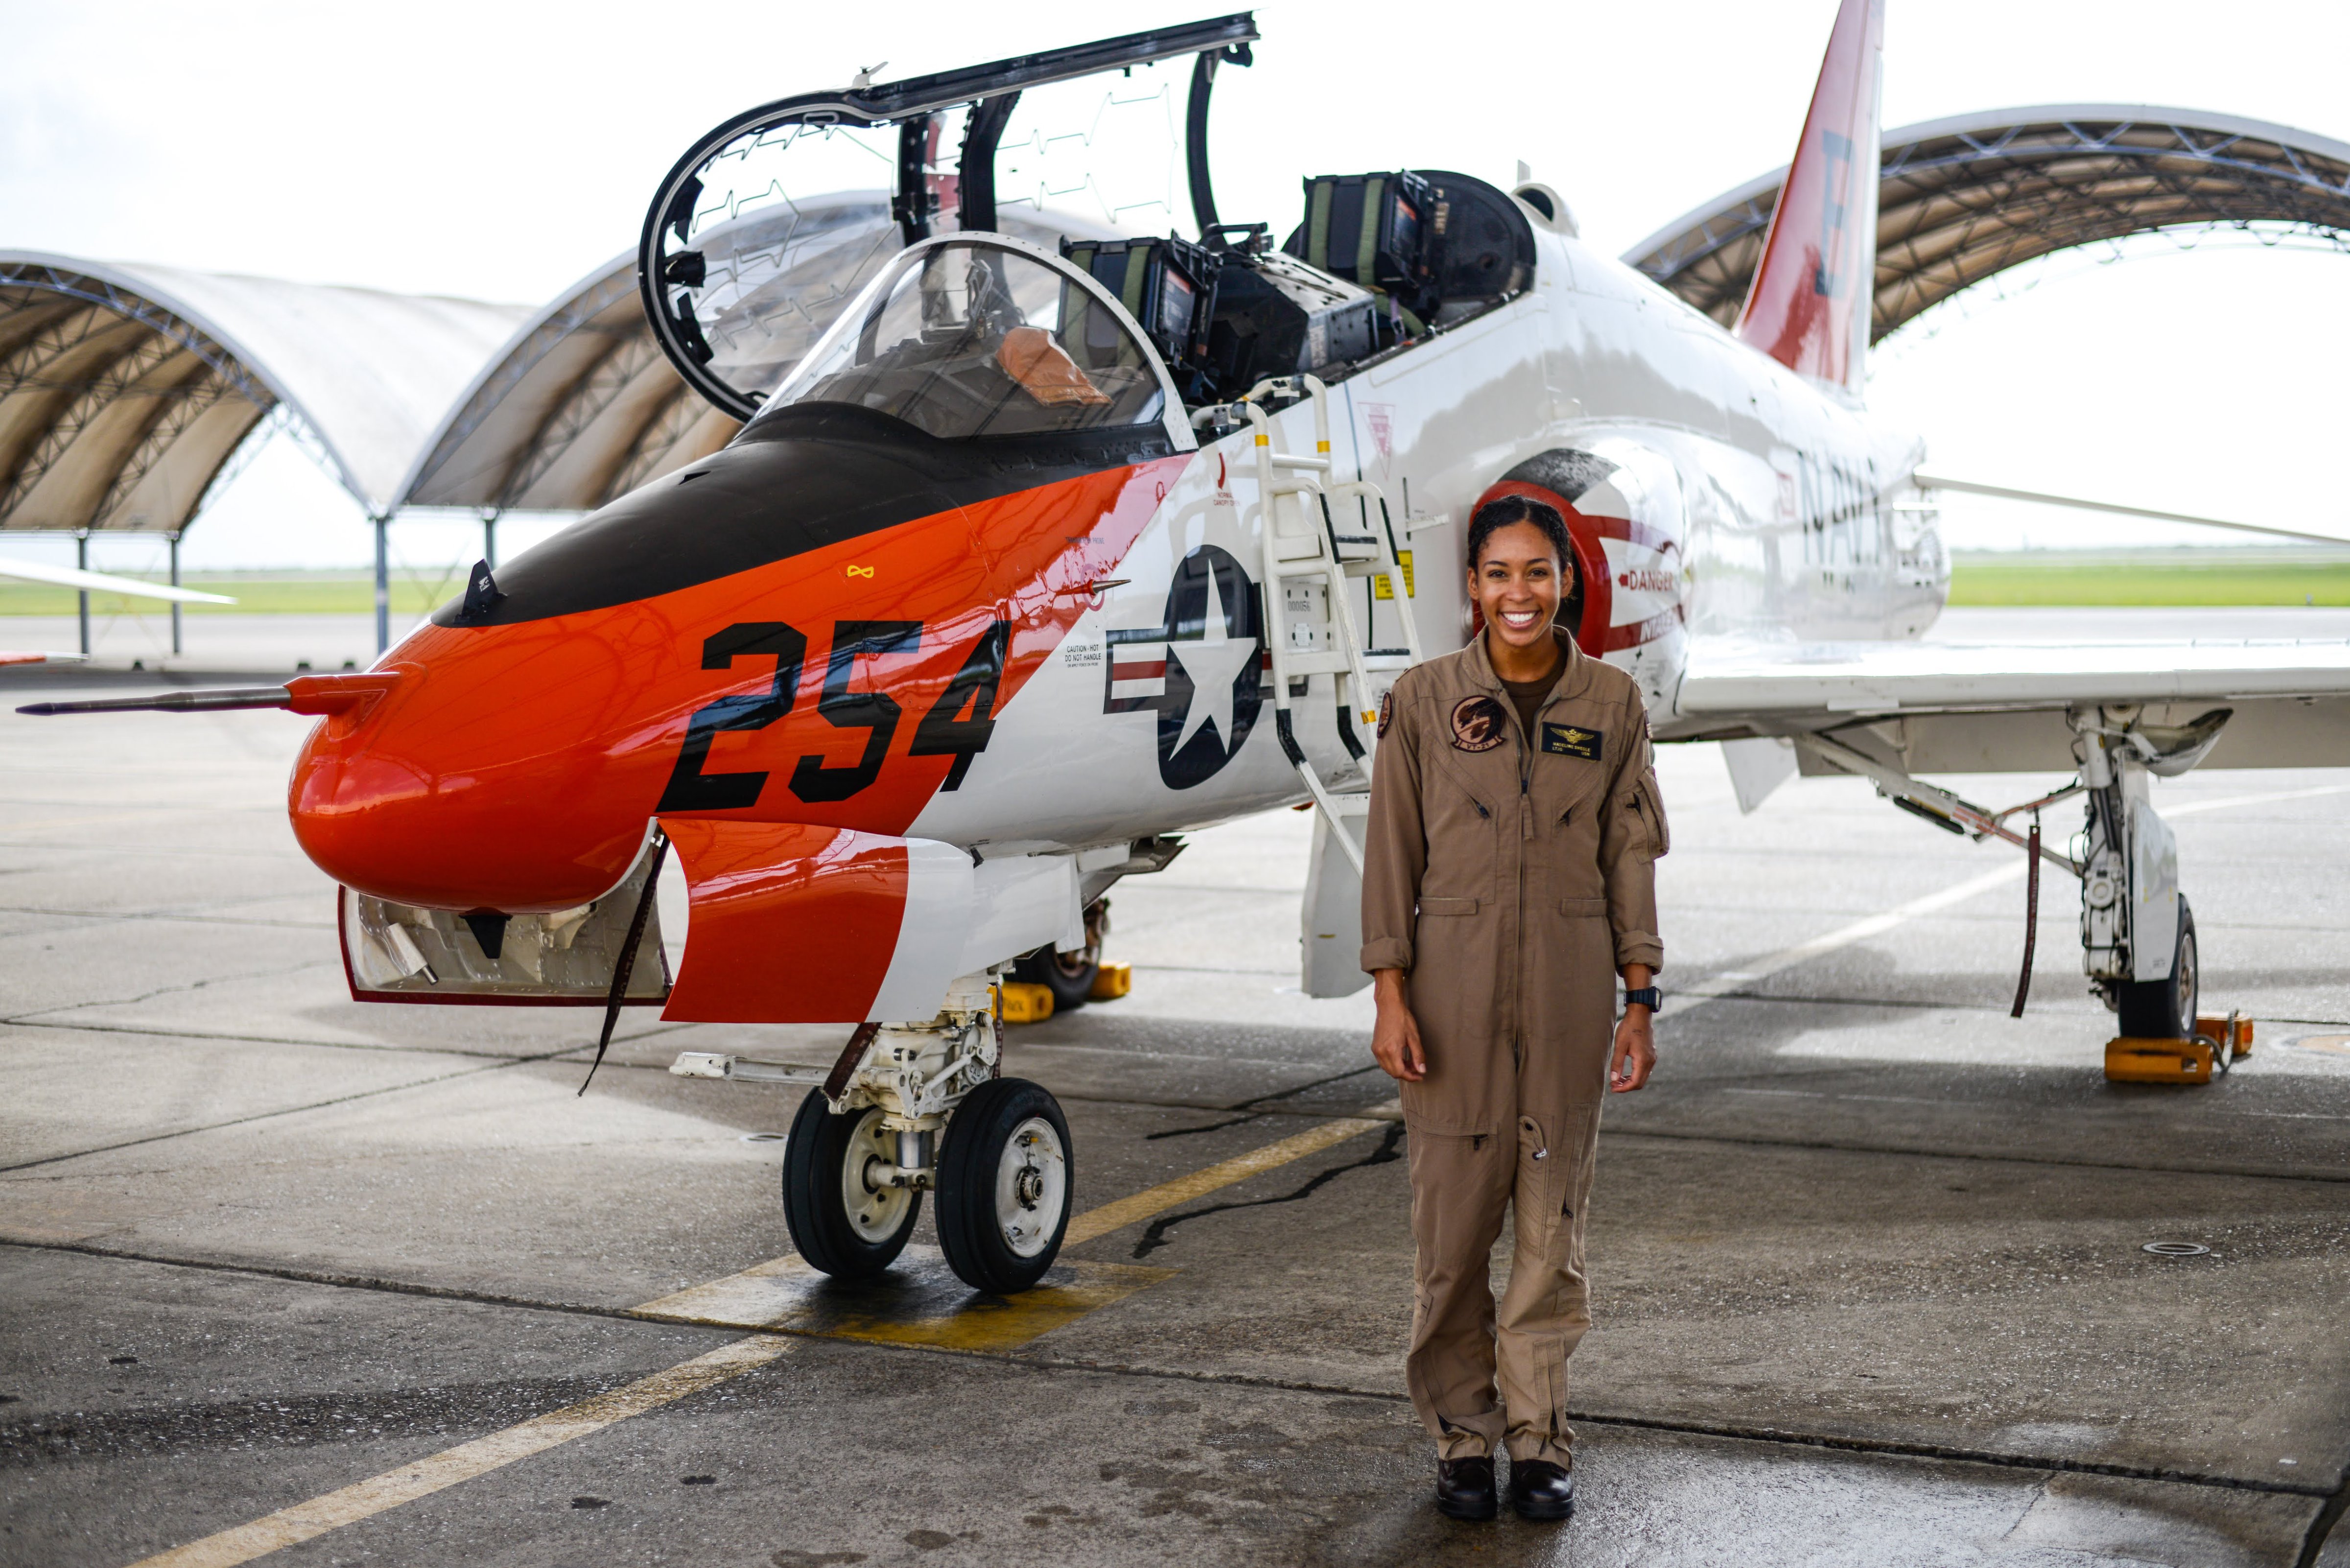 Student Naval Aviator Lt. j.g. Madeline Swegle, assigned to the Redhawks of Training Squadron (VT) 21 stands by a T-45C Goshawk training aircraft following her final flight to complete the undergraduate Tactical Air (Strike) pilot training syllabus, at Naval Air Station Kingsville, Texas, on July 7, 2020. (U.S. Navy photo by Lt.j.g. Luke Redito/Released)